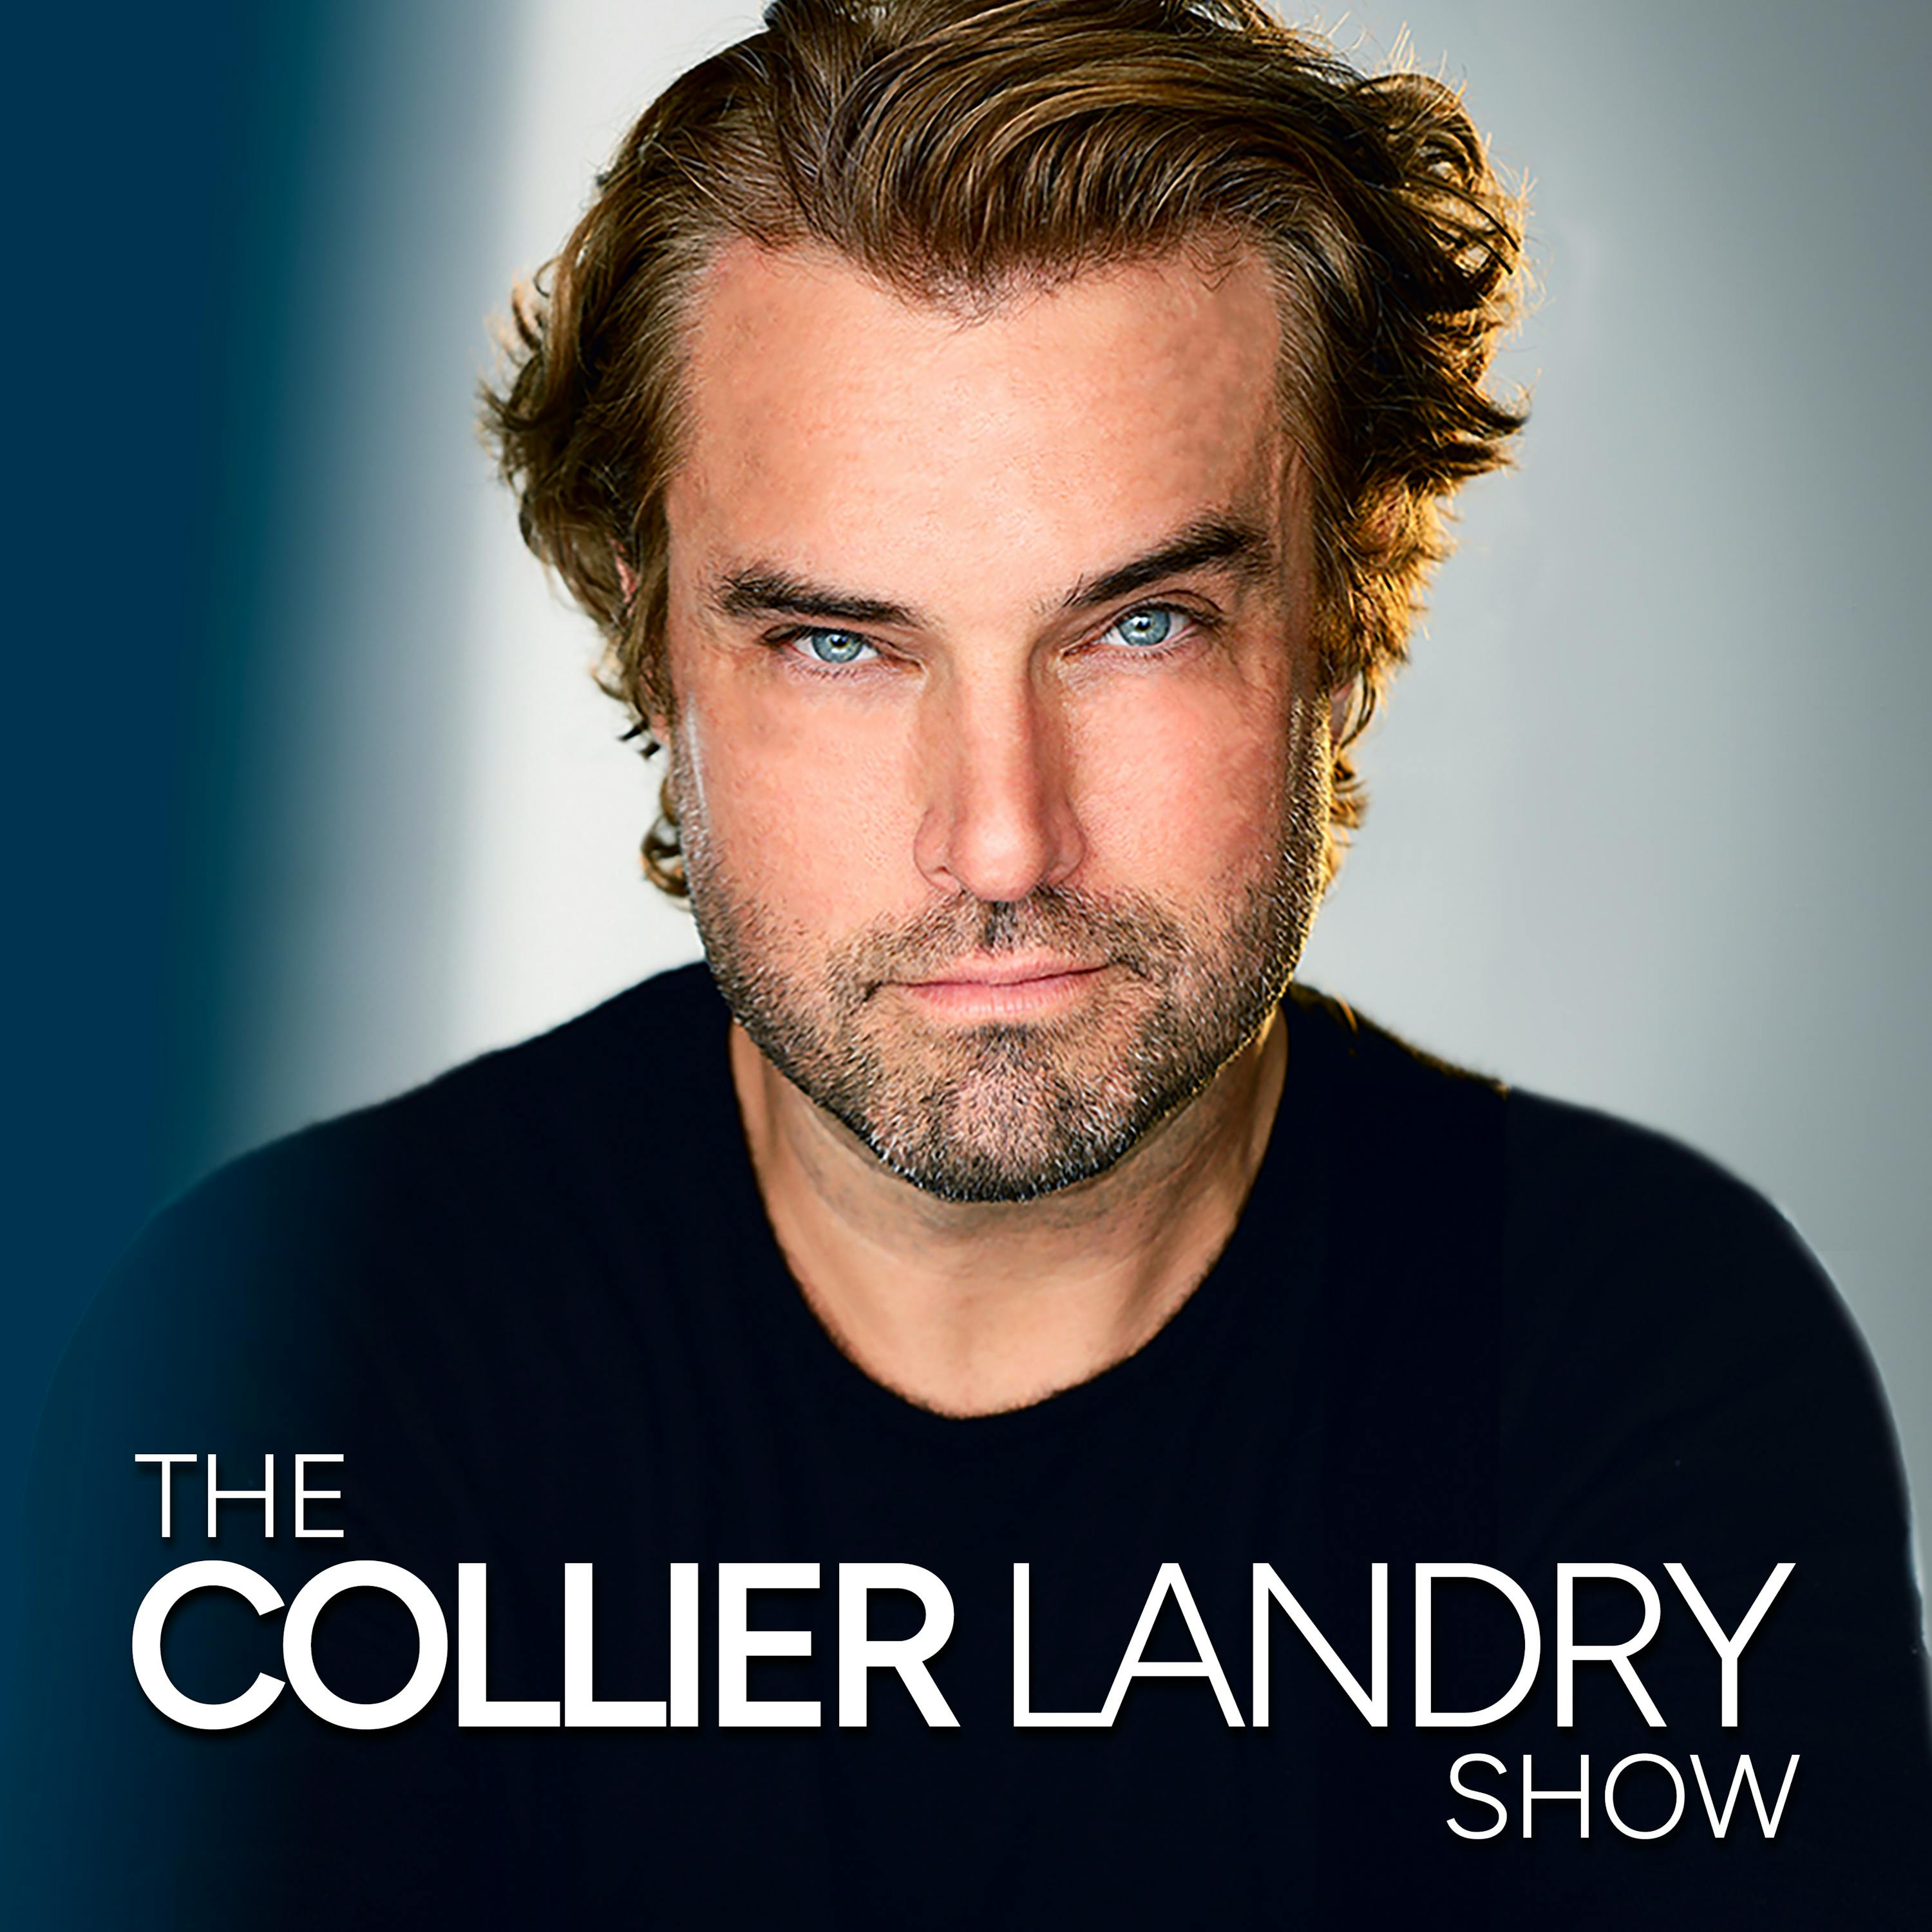 The Collier Landry Show podcast show image